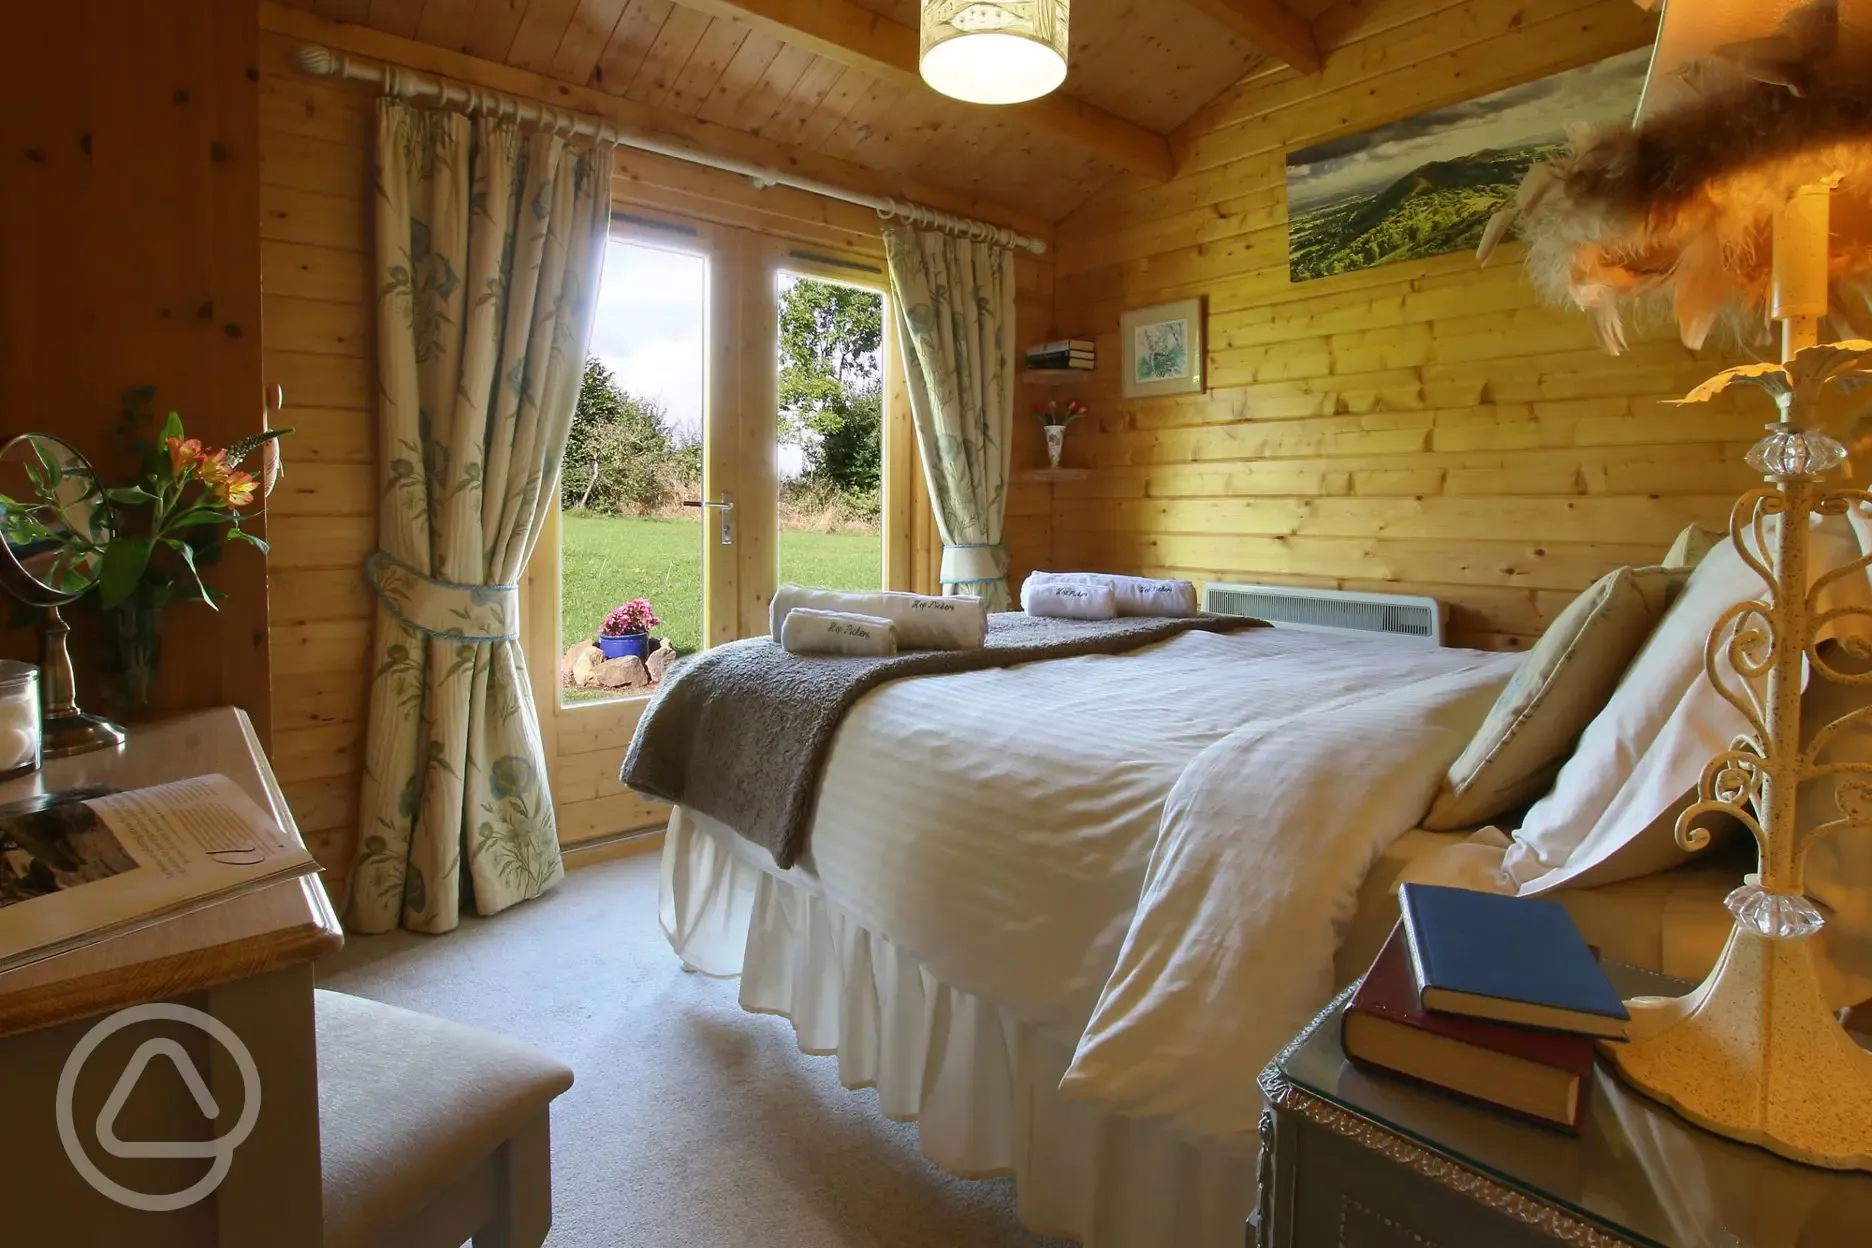 Double bed room in the cabin